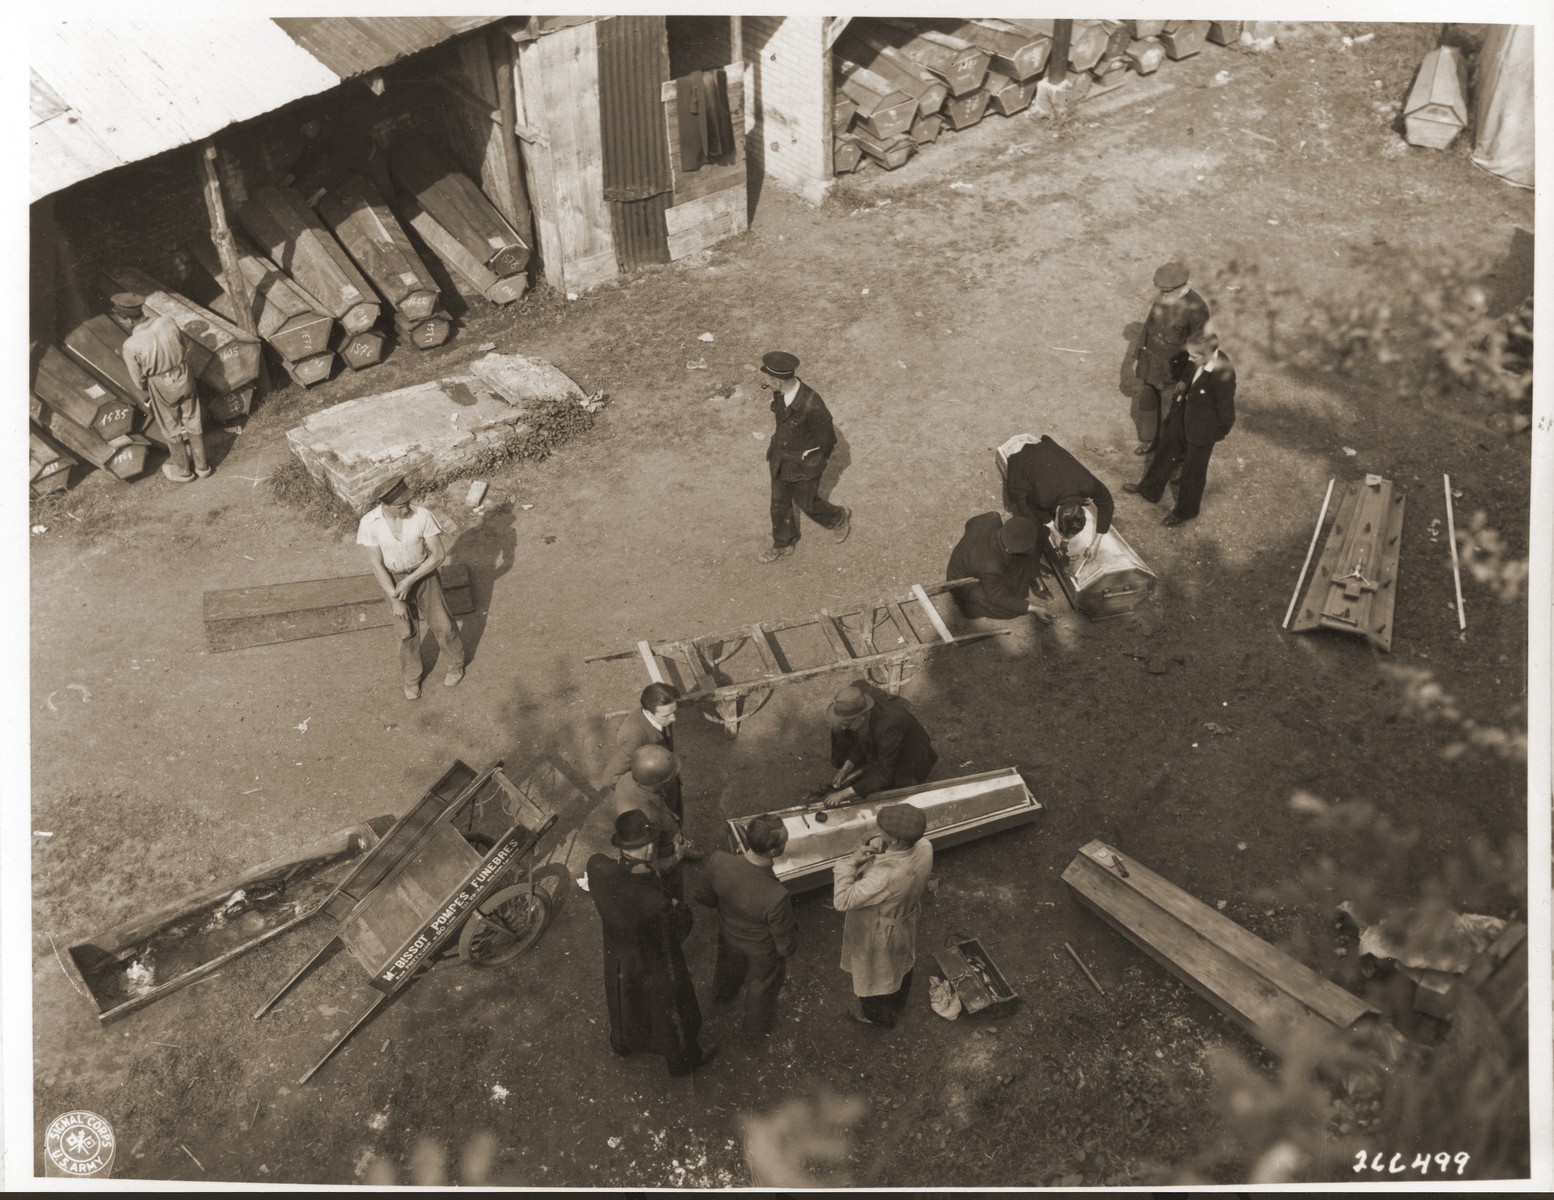 Belgian civilians place the bodies of Belgian political prisoners exhumed from a mass grave into coffins for reburial.